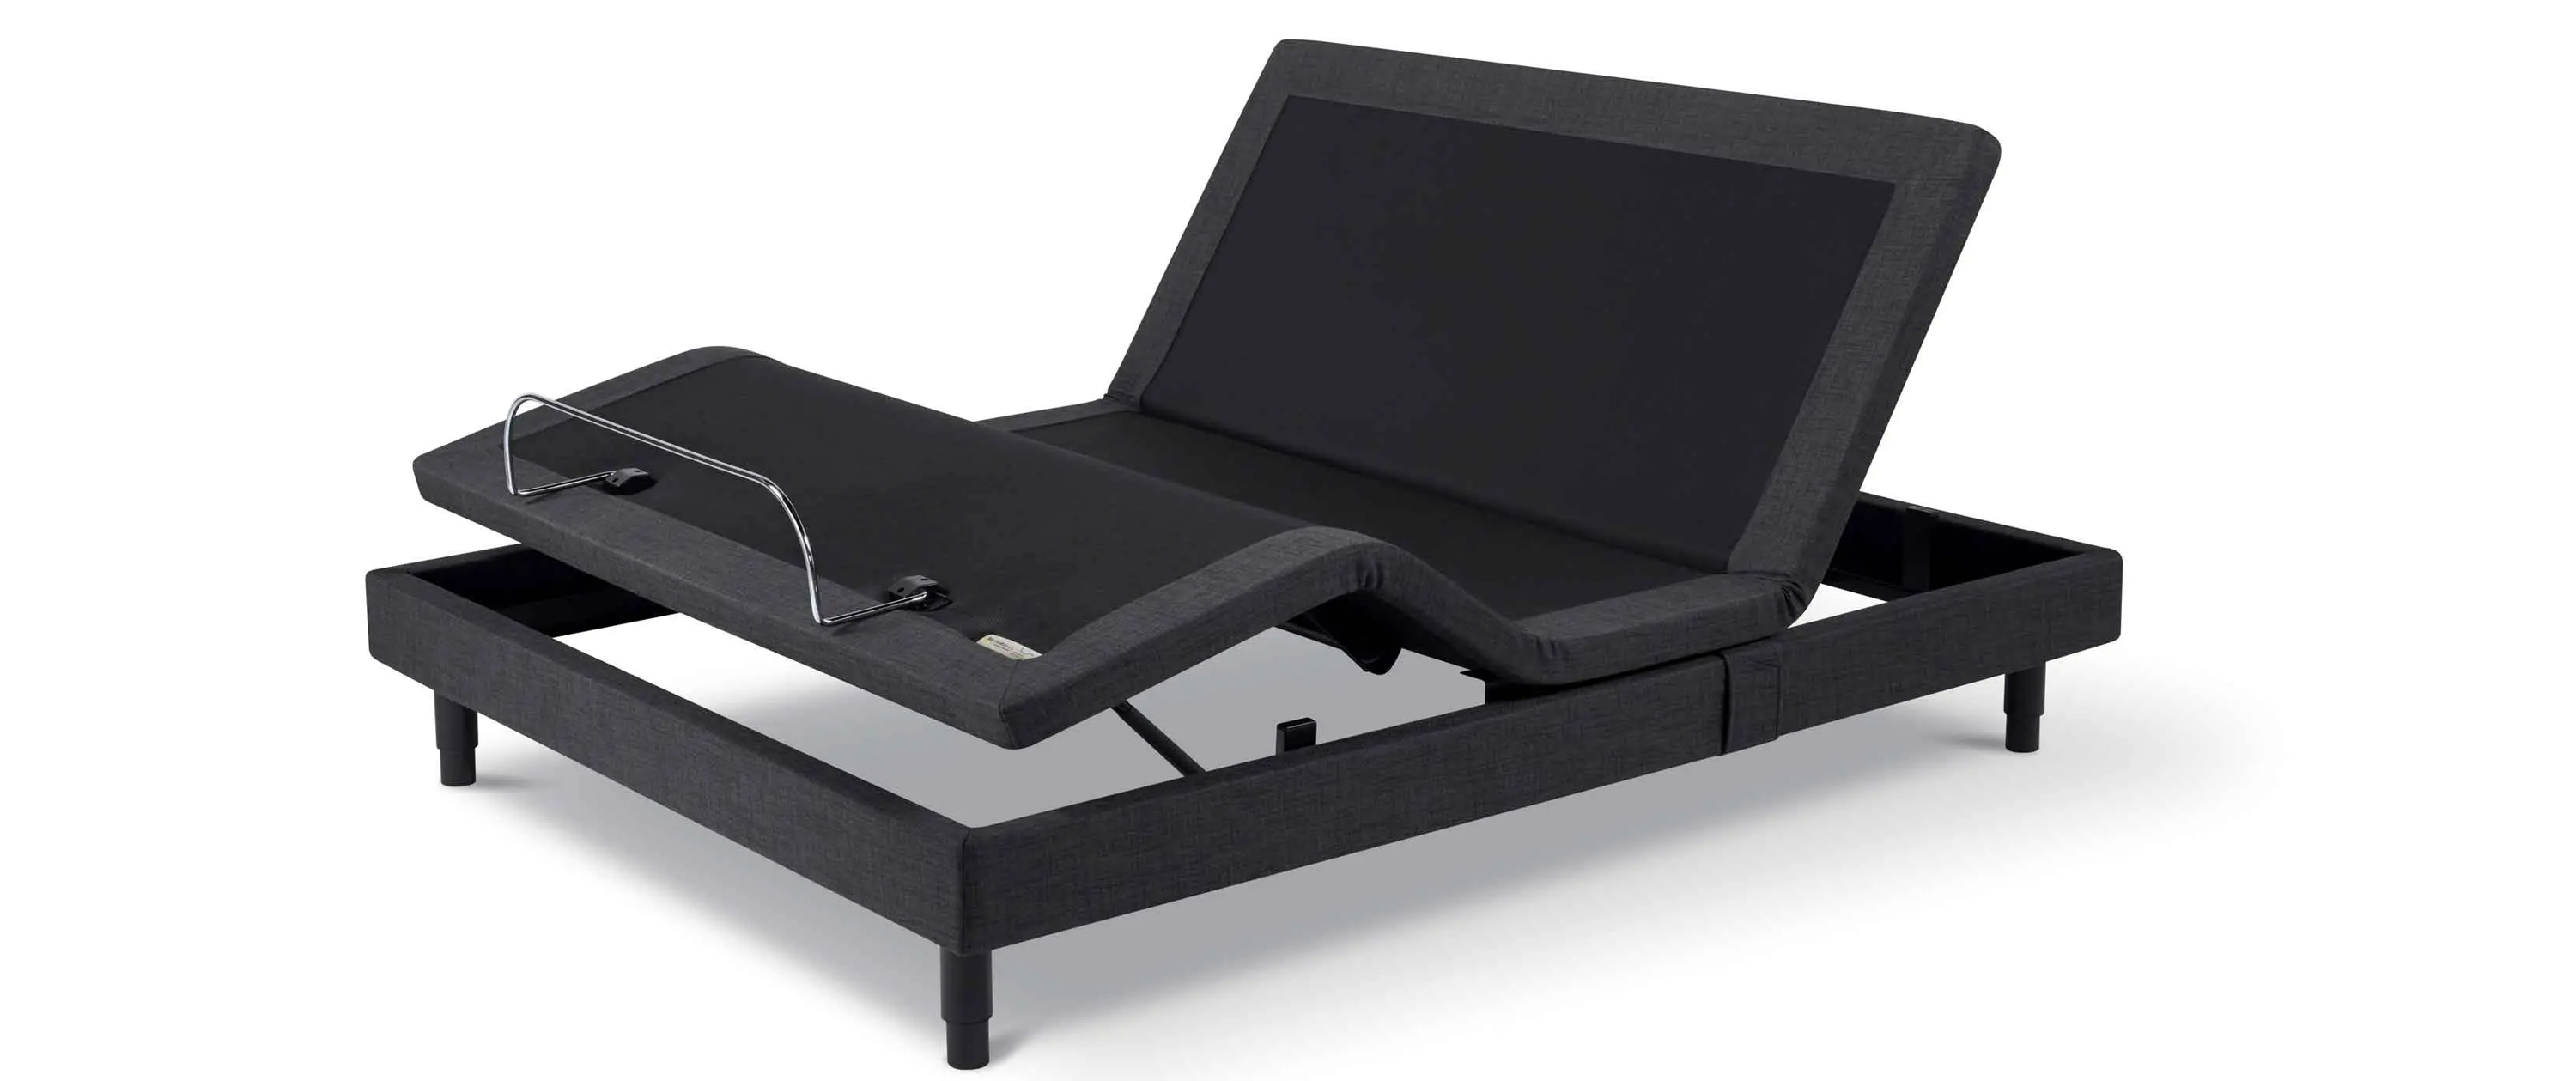 What Are The Pros & Cons For Adjustable Bed Bases?